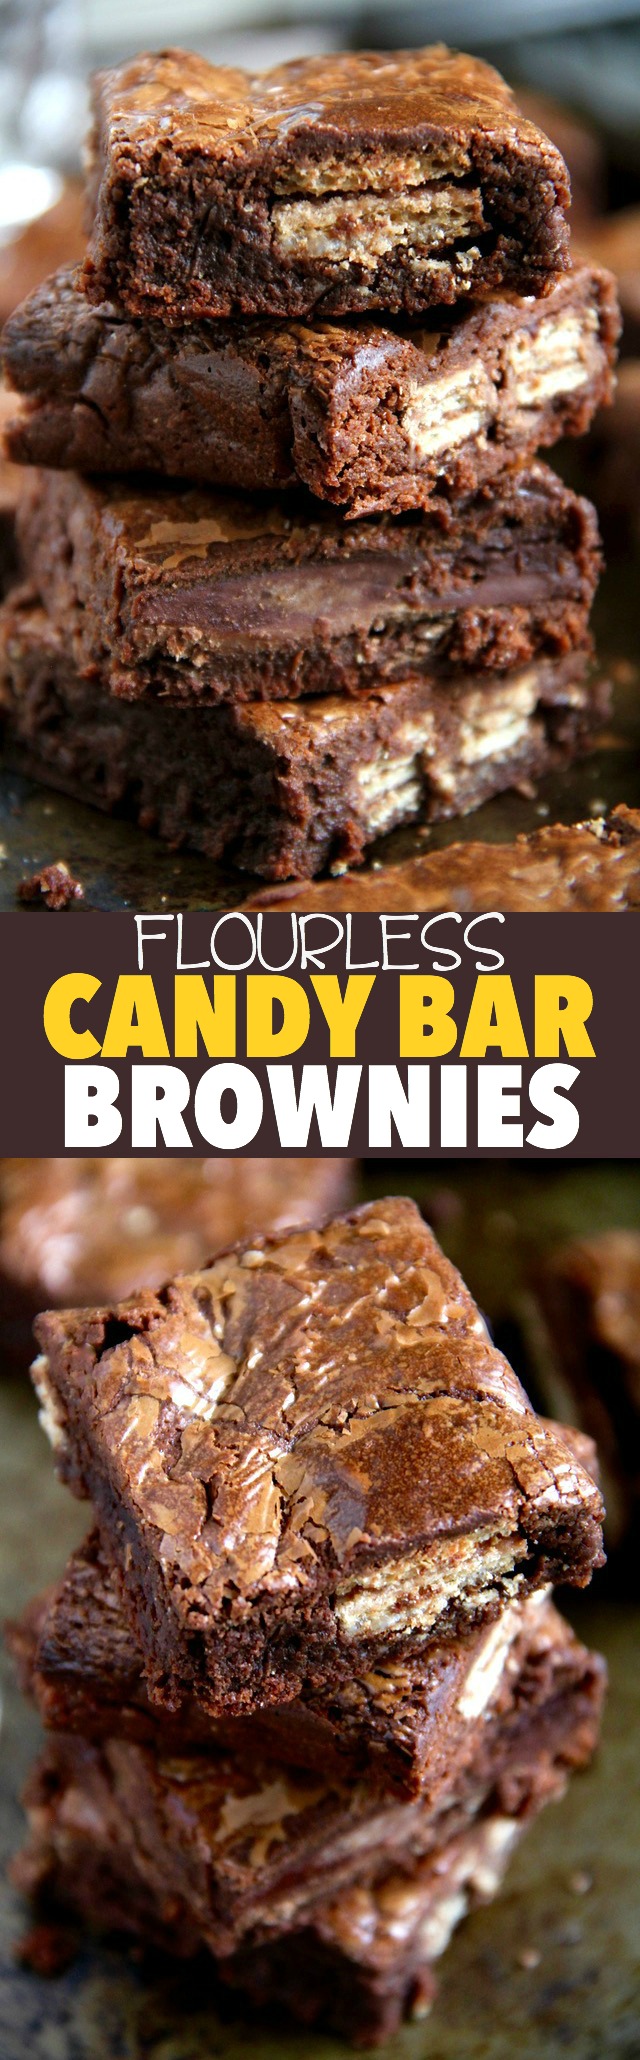 Soft, fudgy, and LOADED with chocolate, these Flourless Candy Bar Brownies are a great way to use up that leftover Halloween, Christmas, or Easter candy! The perfect dessert for any chocolate lover. || runningwithspoons.com #chocolate #brownies #candy #dessert